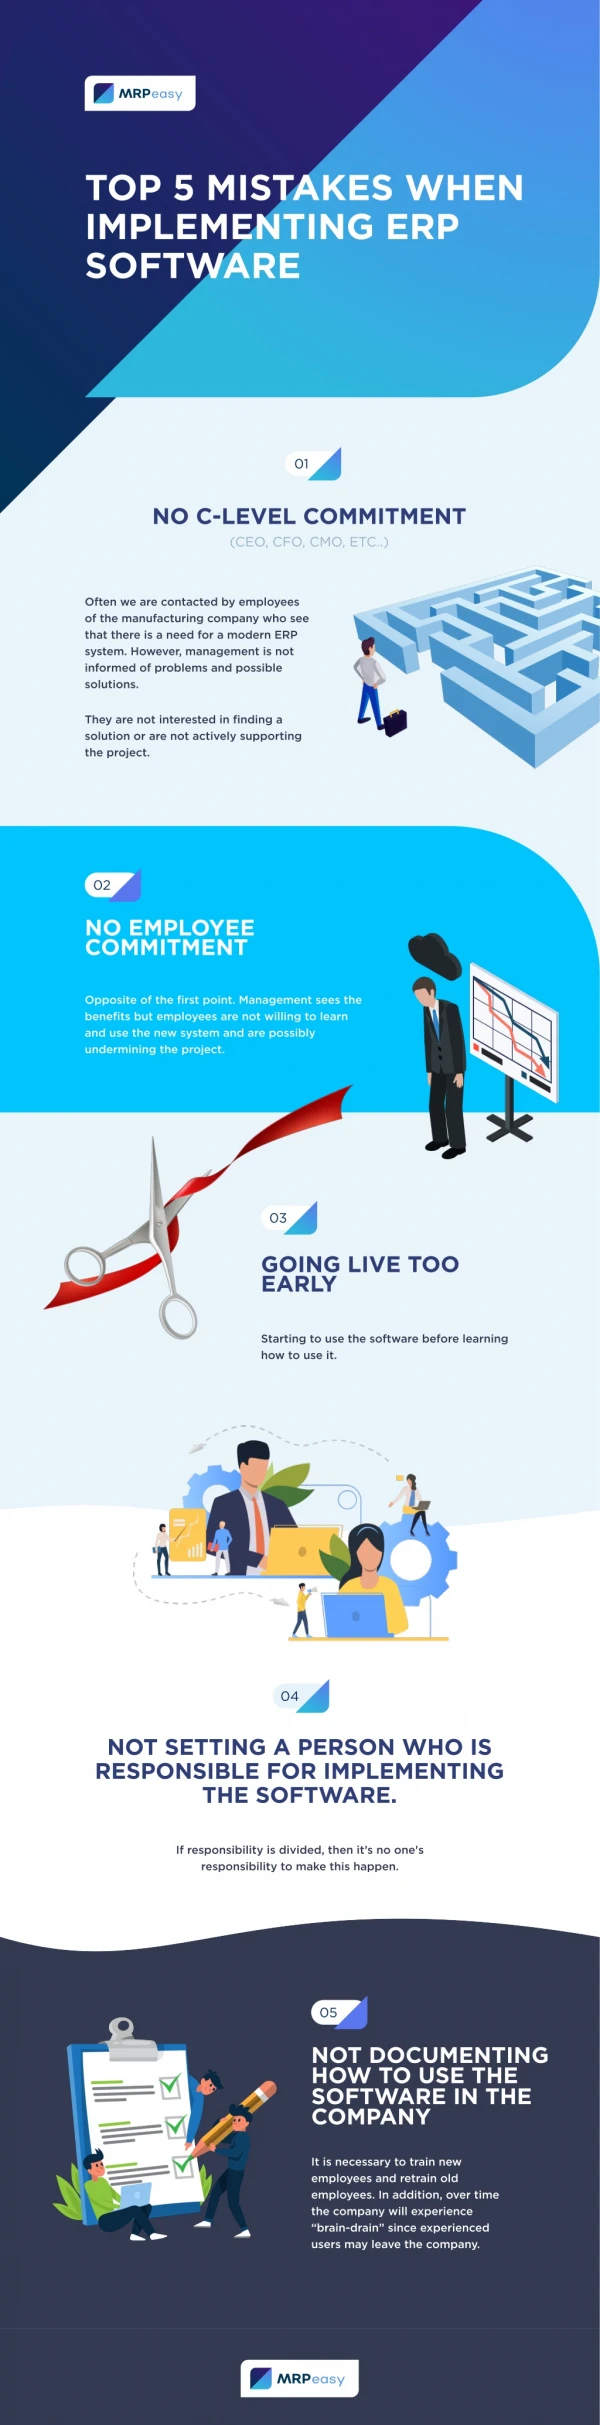 INFOGRAPHIC: Top 5 Mistakes When Implementing ERP Software